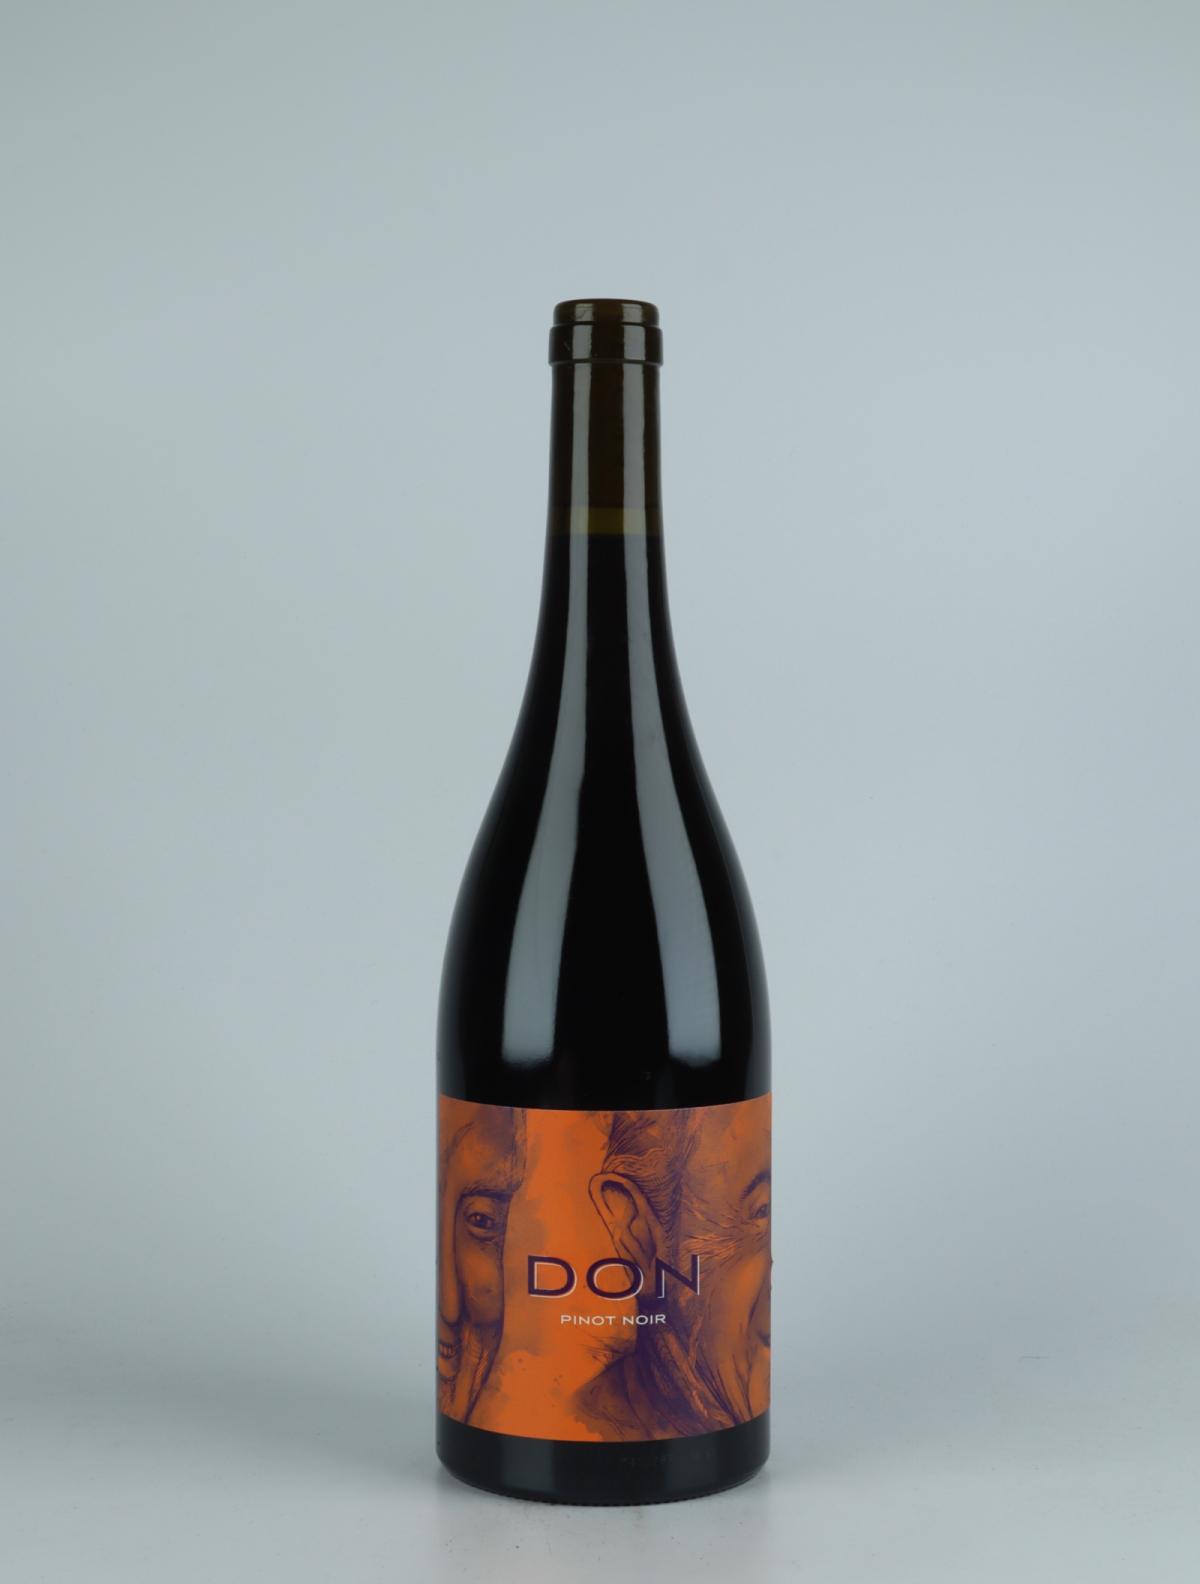 A bottle 2020 Nelson Pinot Noir Red wine from Don, Nelson in New Zealand